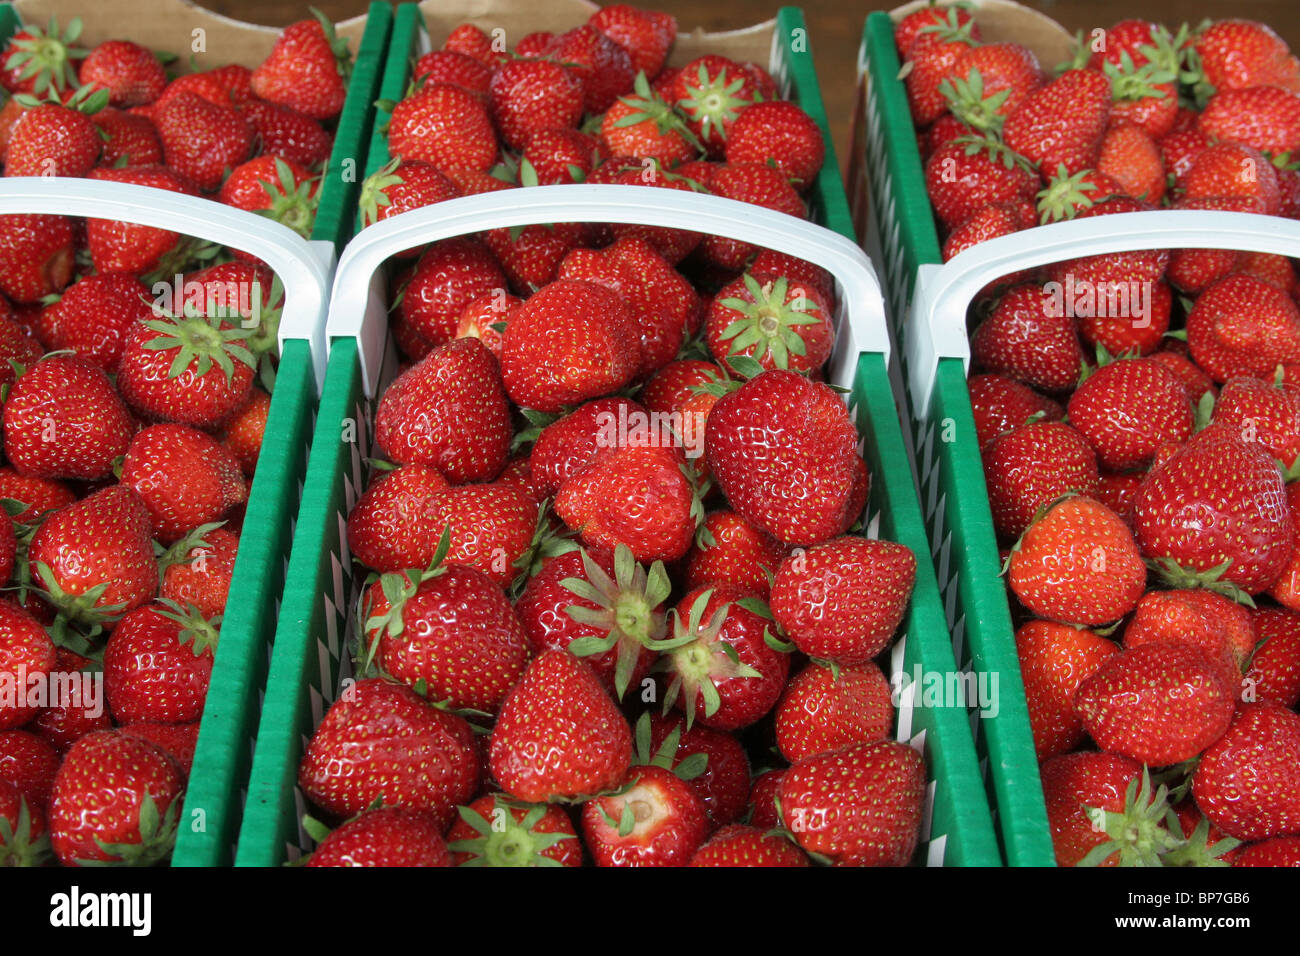 Strawberry (Fragaria x ananassa). Ripe fruit in baskets offered for sale. Stock Photo